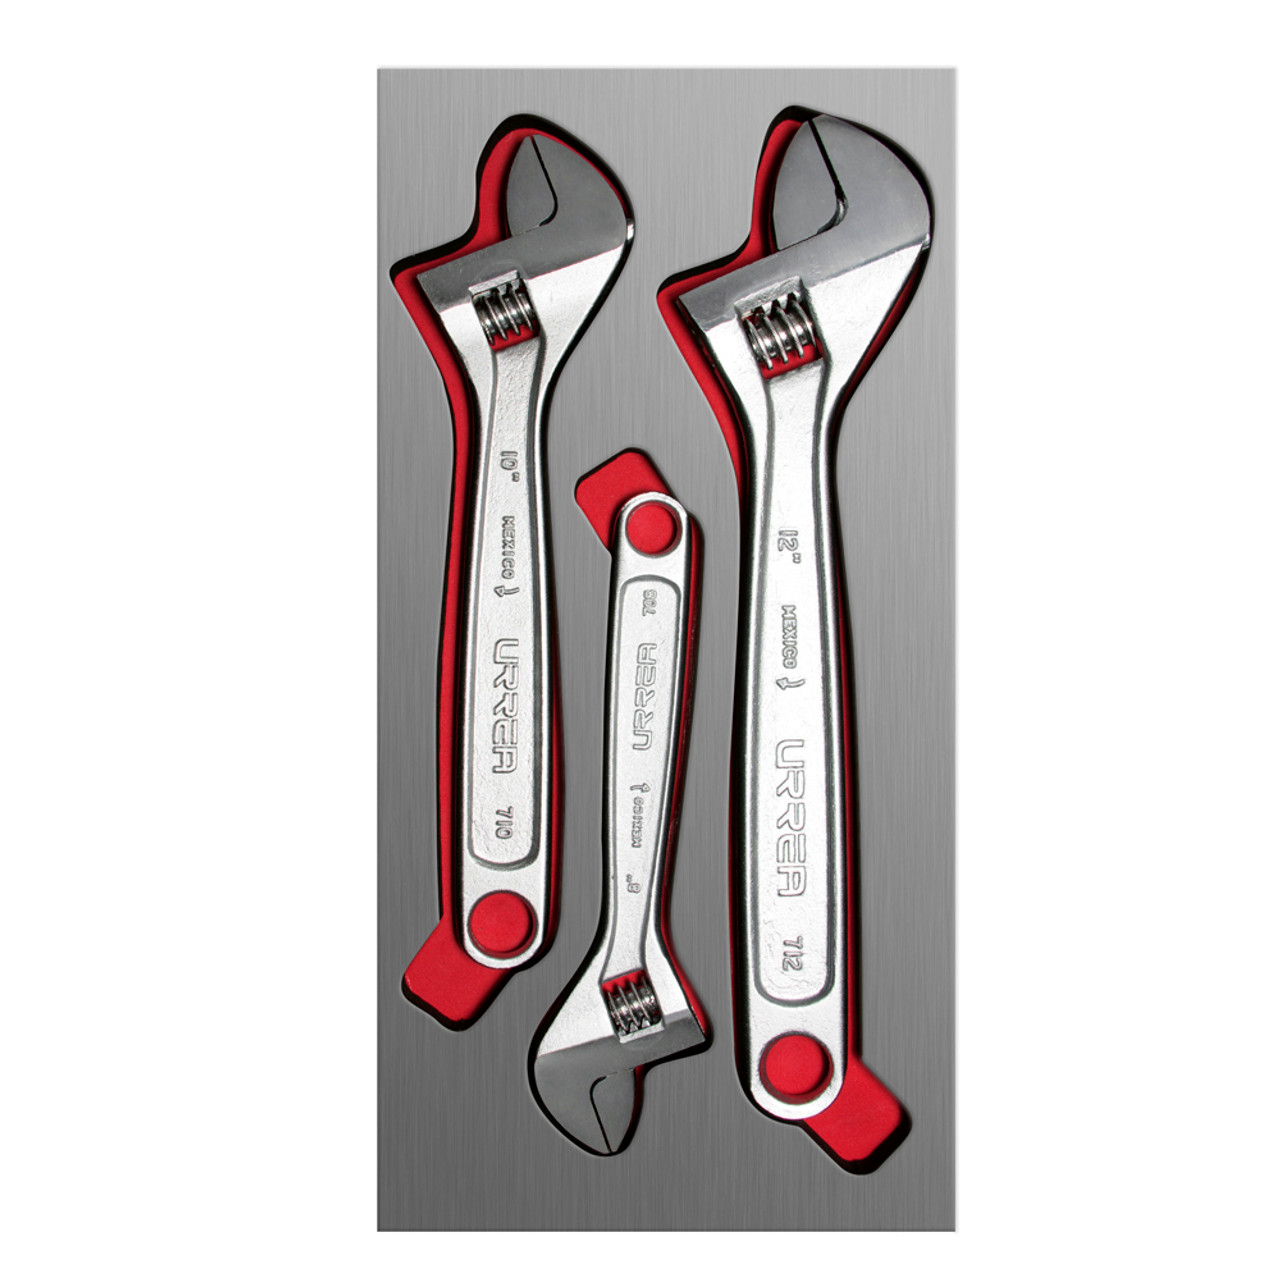 URREA 3 pc ADJUSTABLE WRENCH SETS WITH EVA LAMINATED PLASTIC COVER #CH111L